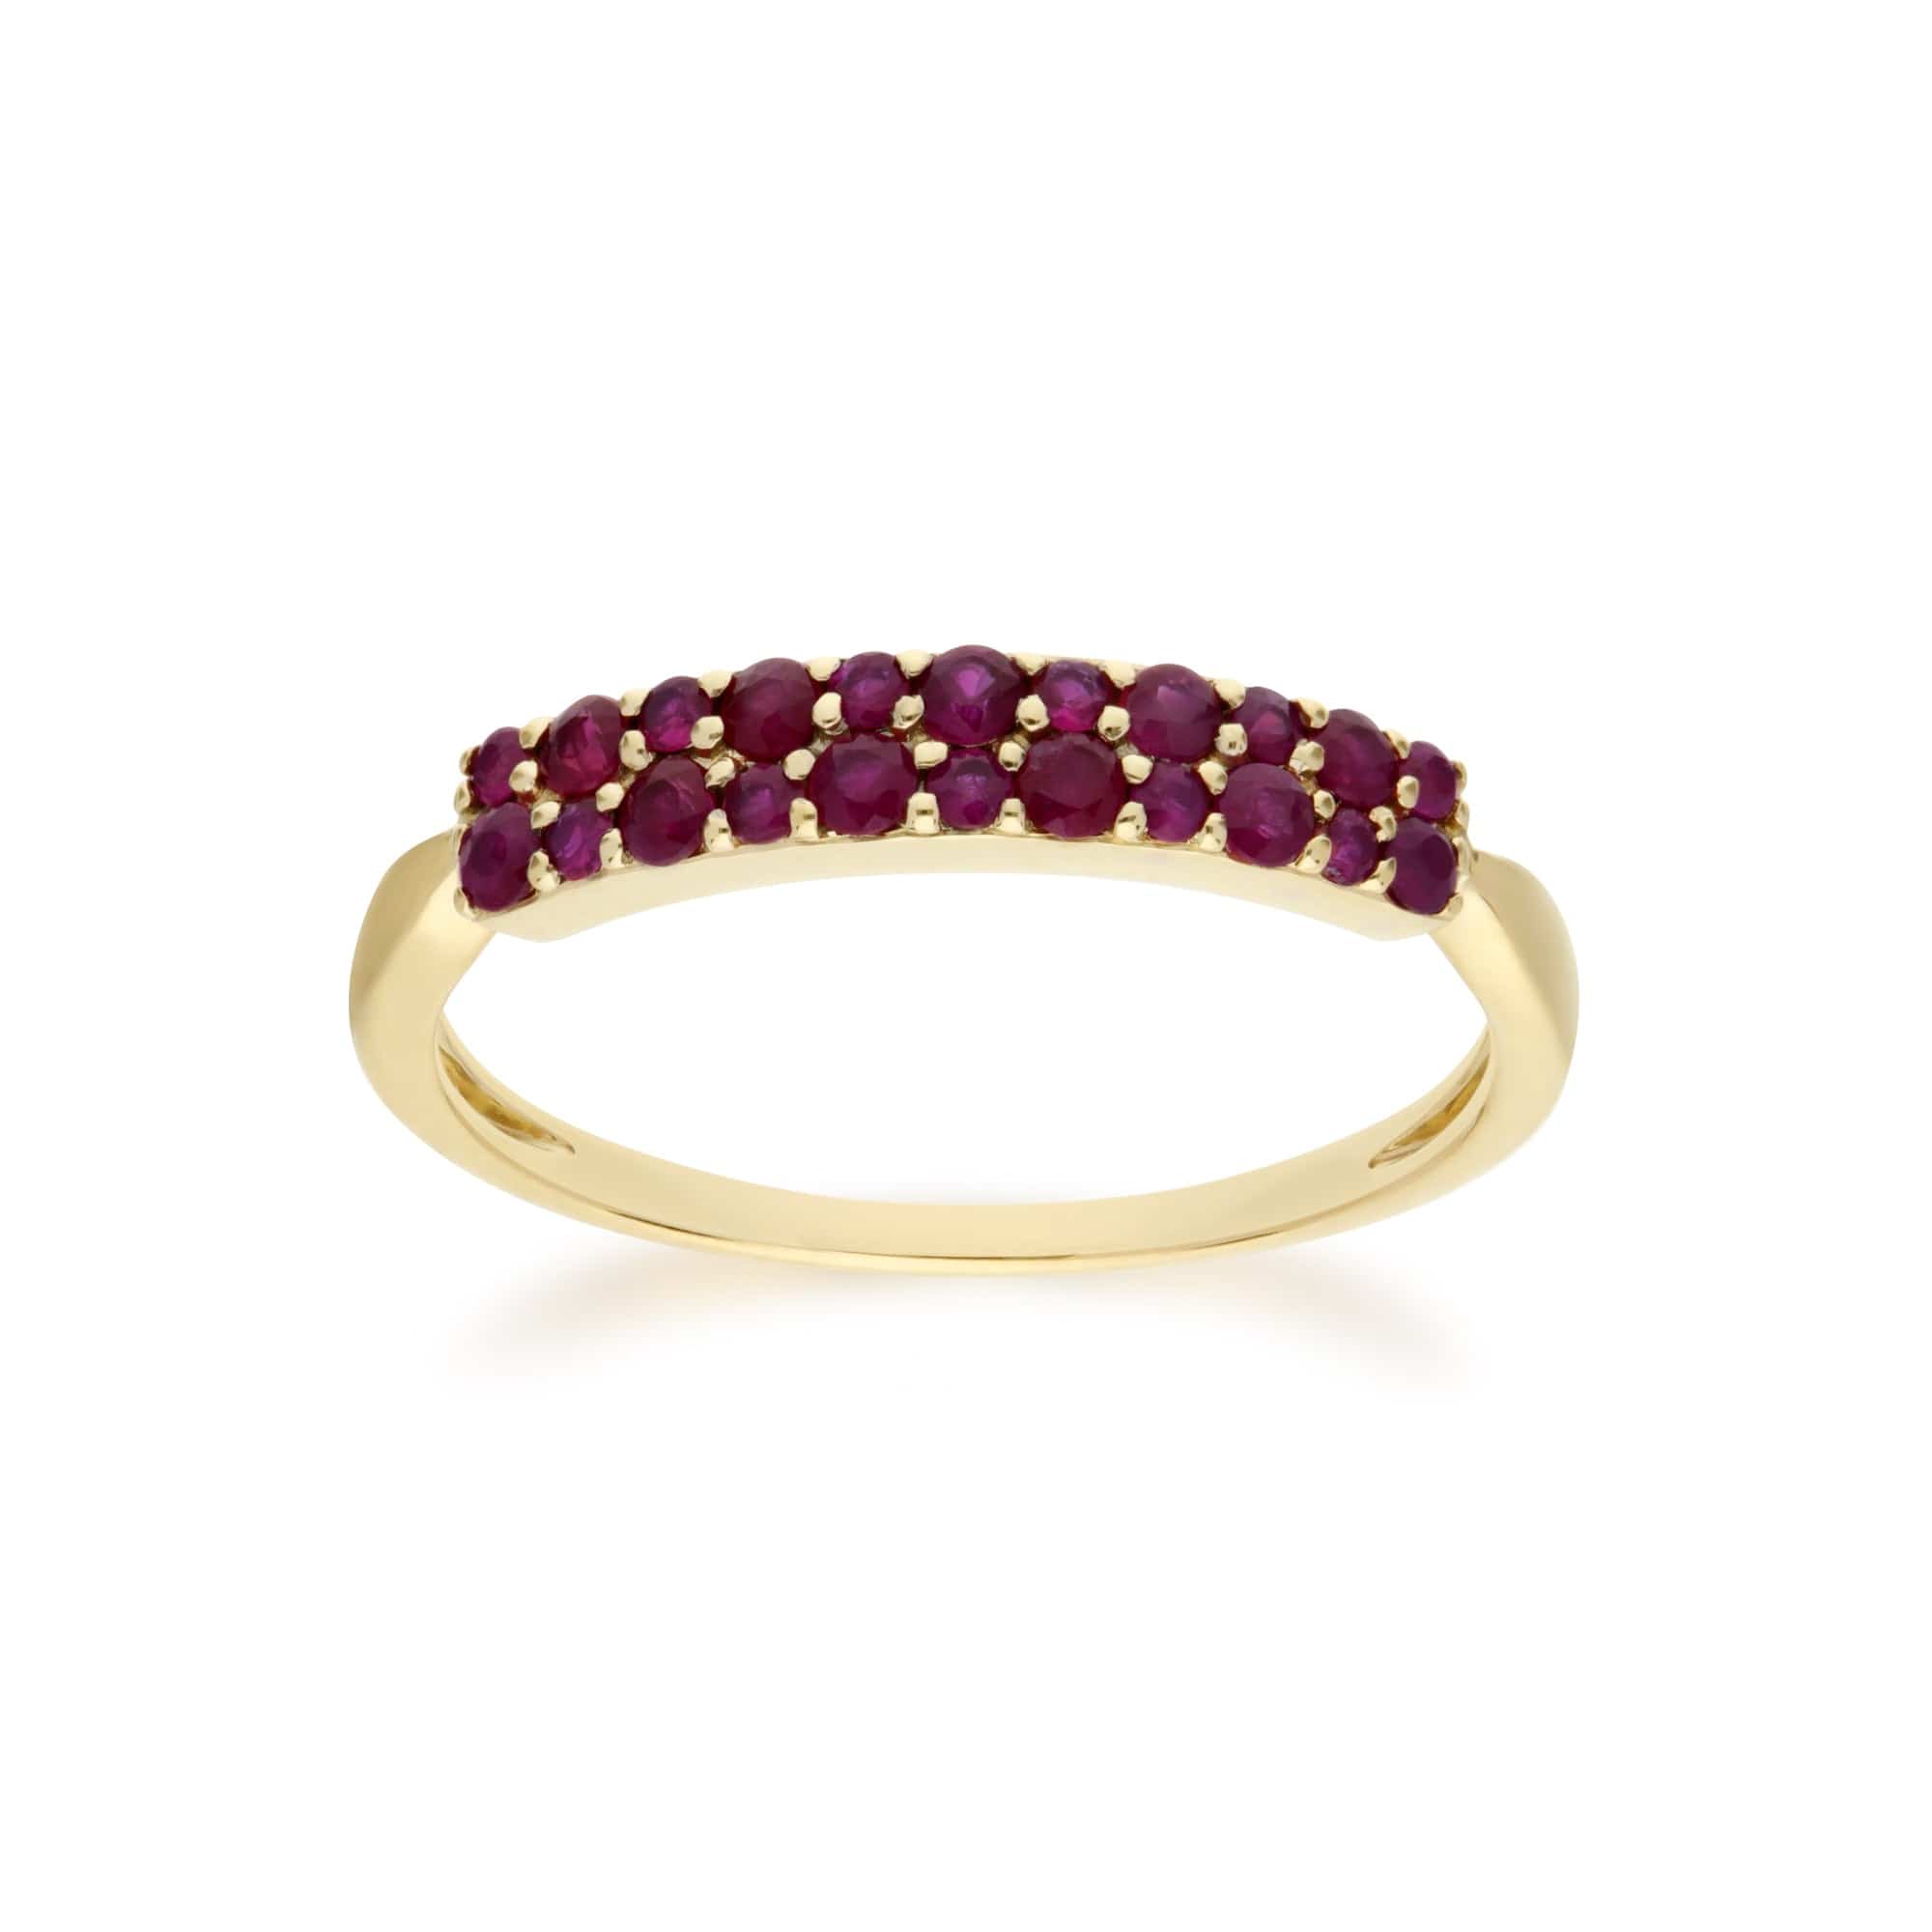 Contemporary 0.41ct Pavé Ruby Cluster Ring in 9ct Yellow Gold - Gemondo